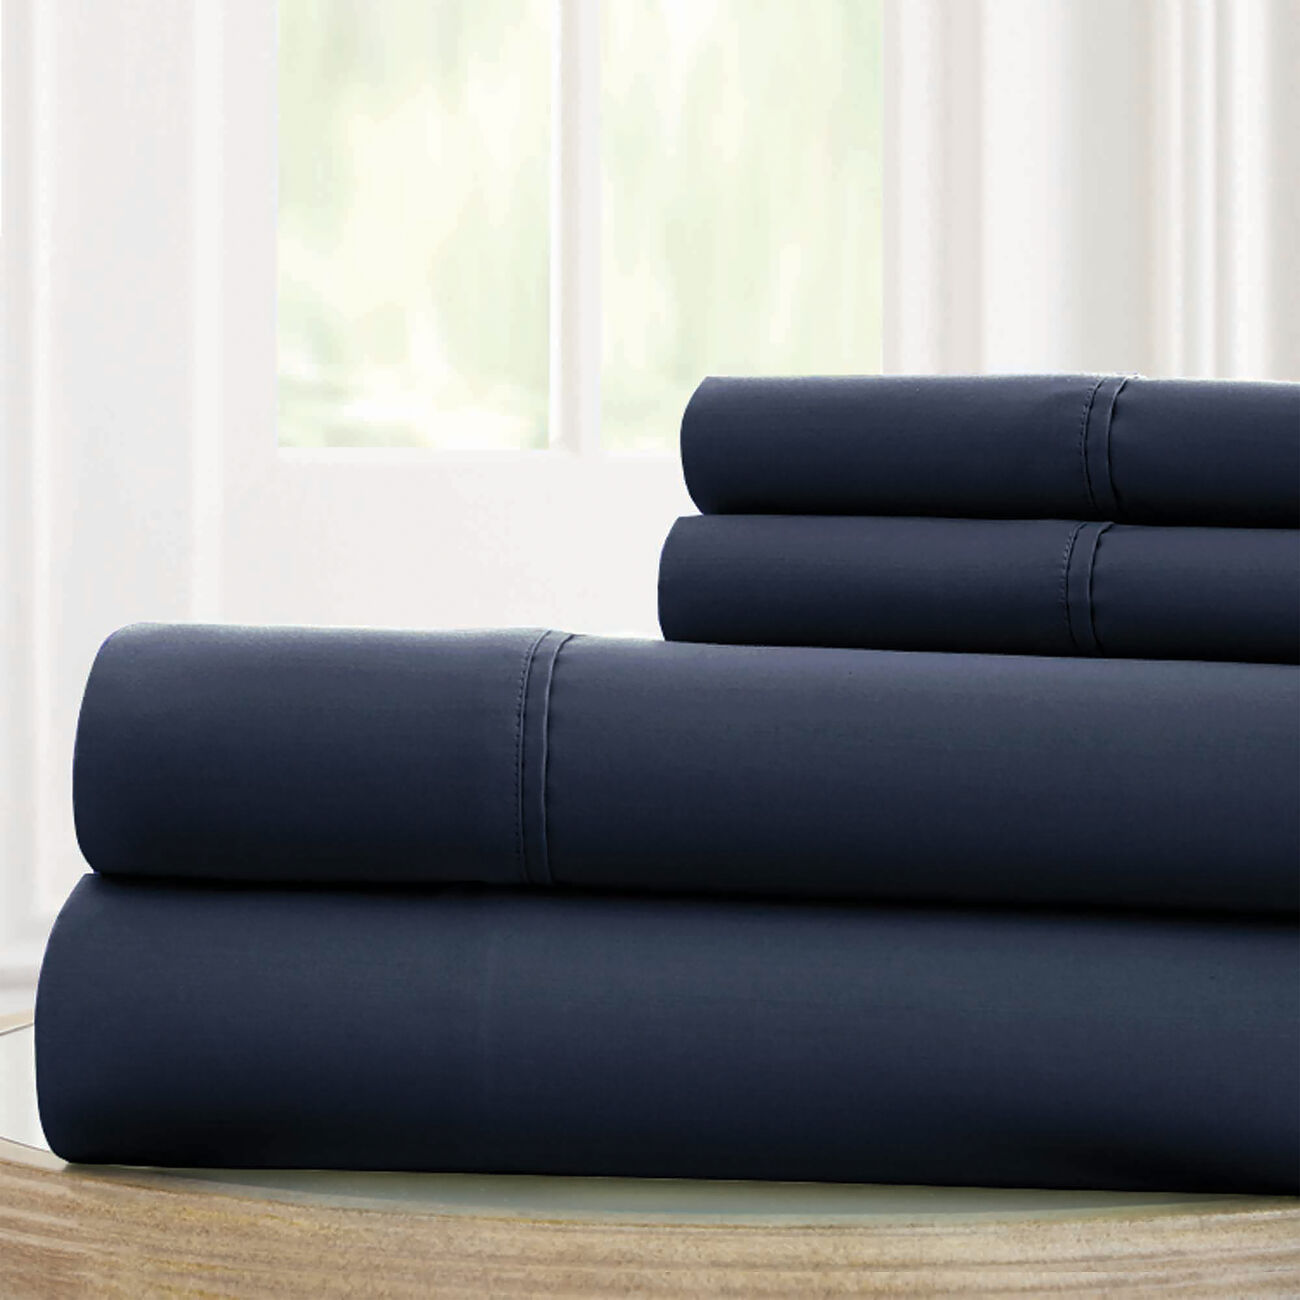 Bezons 4 Piece King Size Microfiber Sheet Set with 1800 Thread Count, Navy Blue